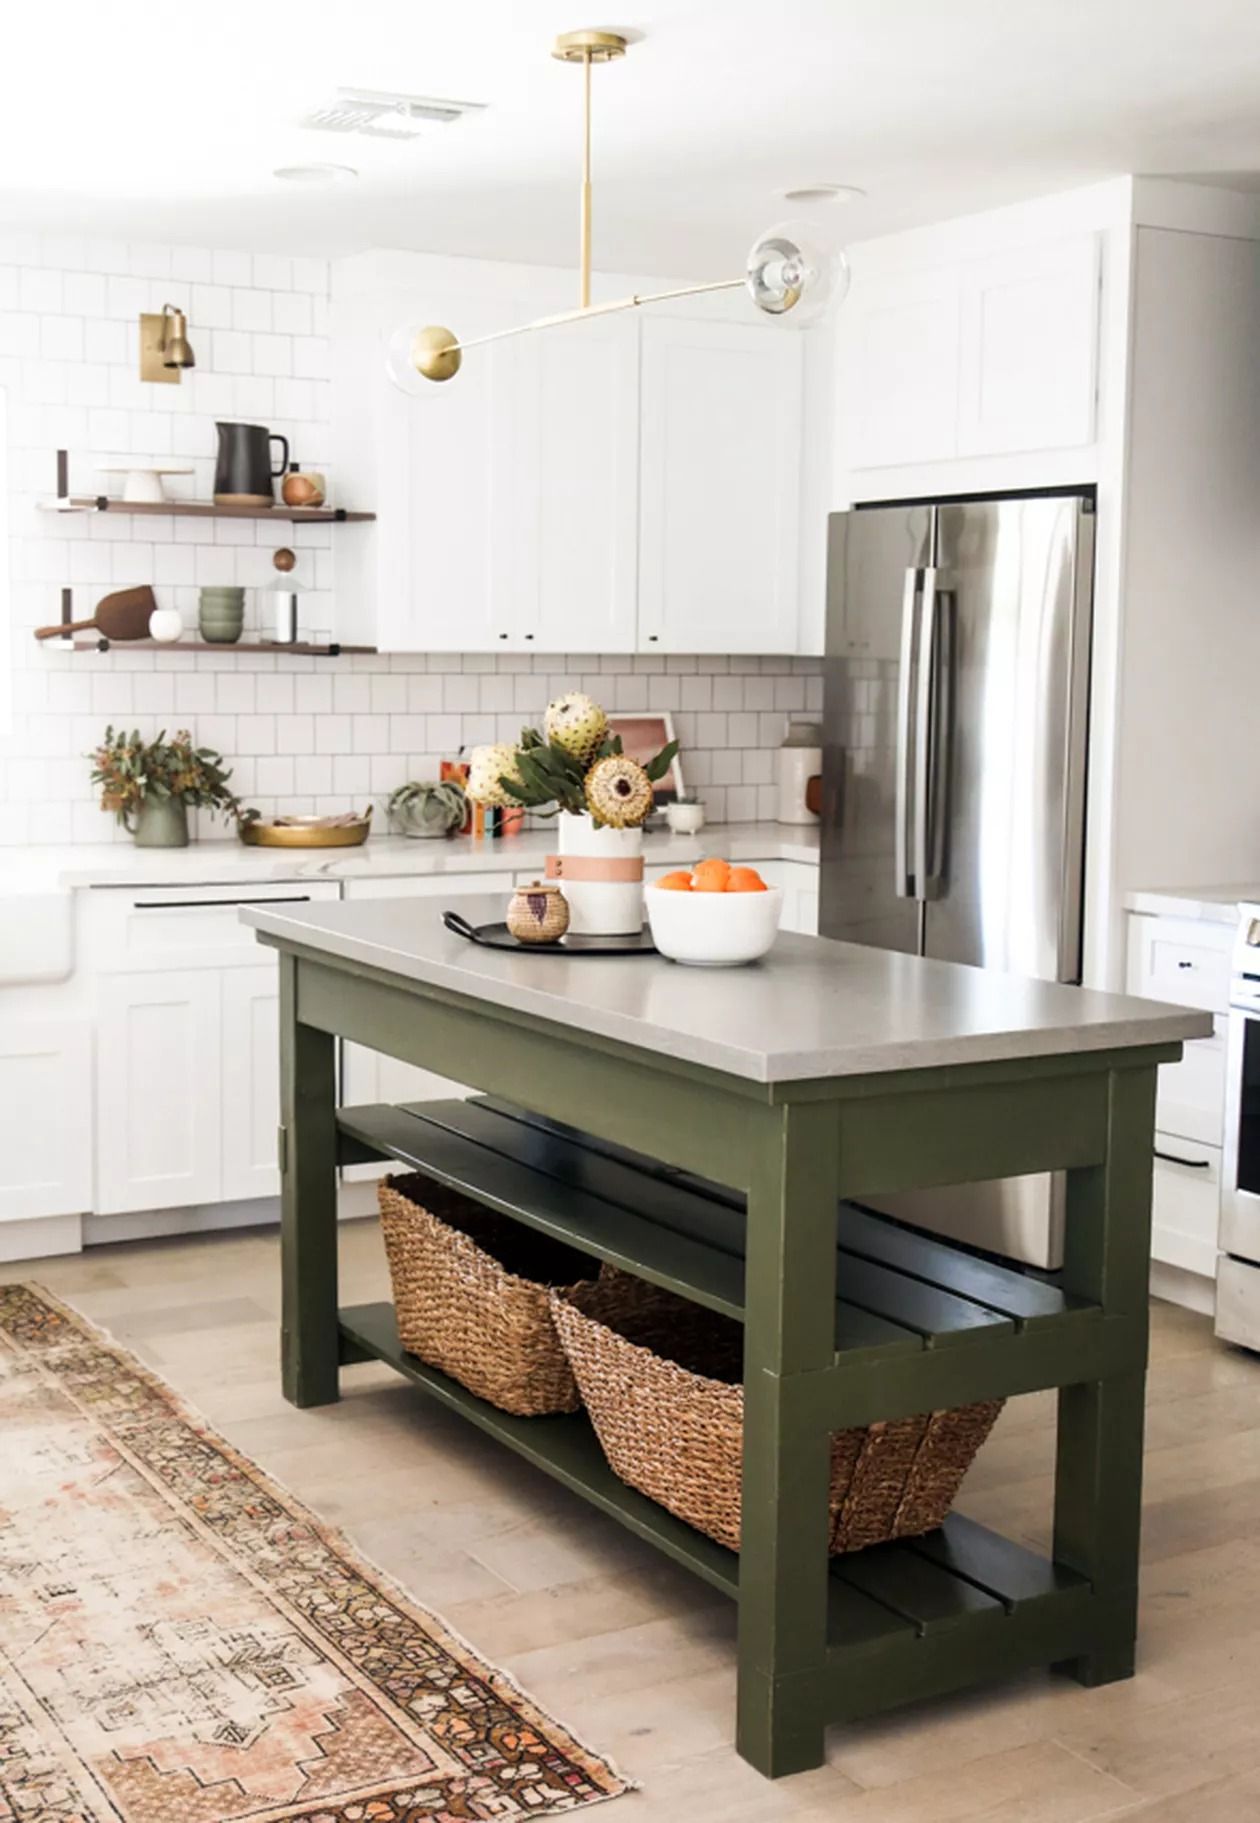 Maximizing Space: The Benefits of a Small Kitchen with an Island